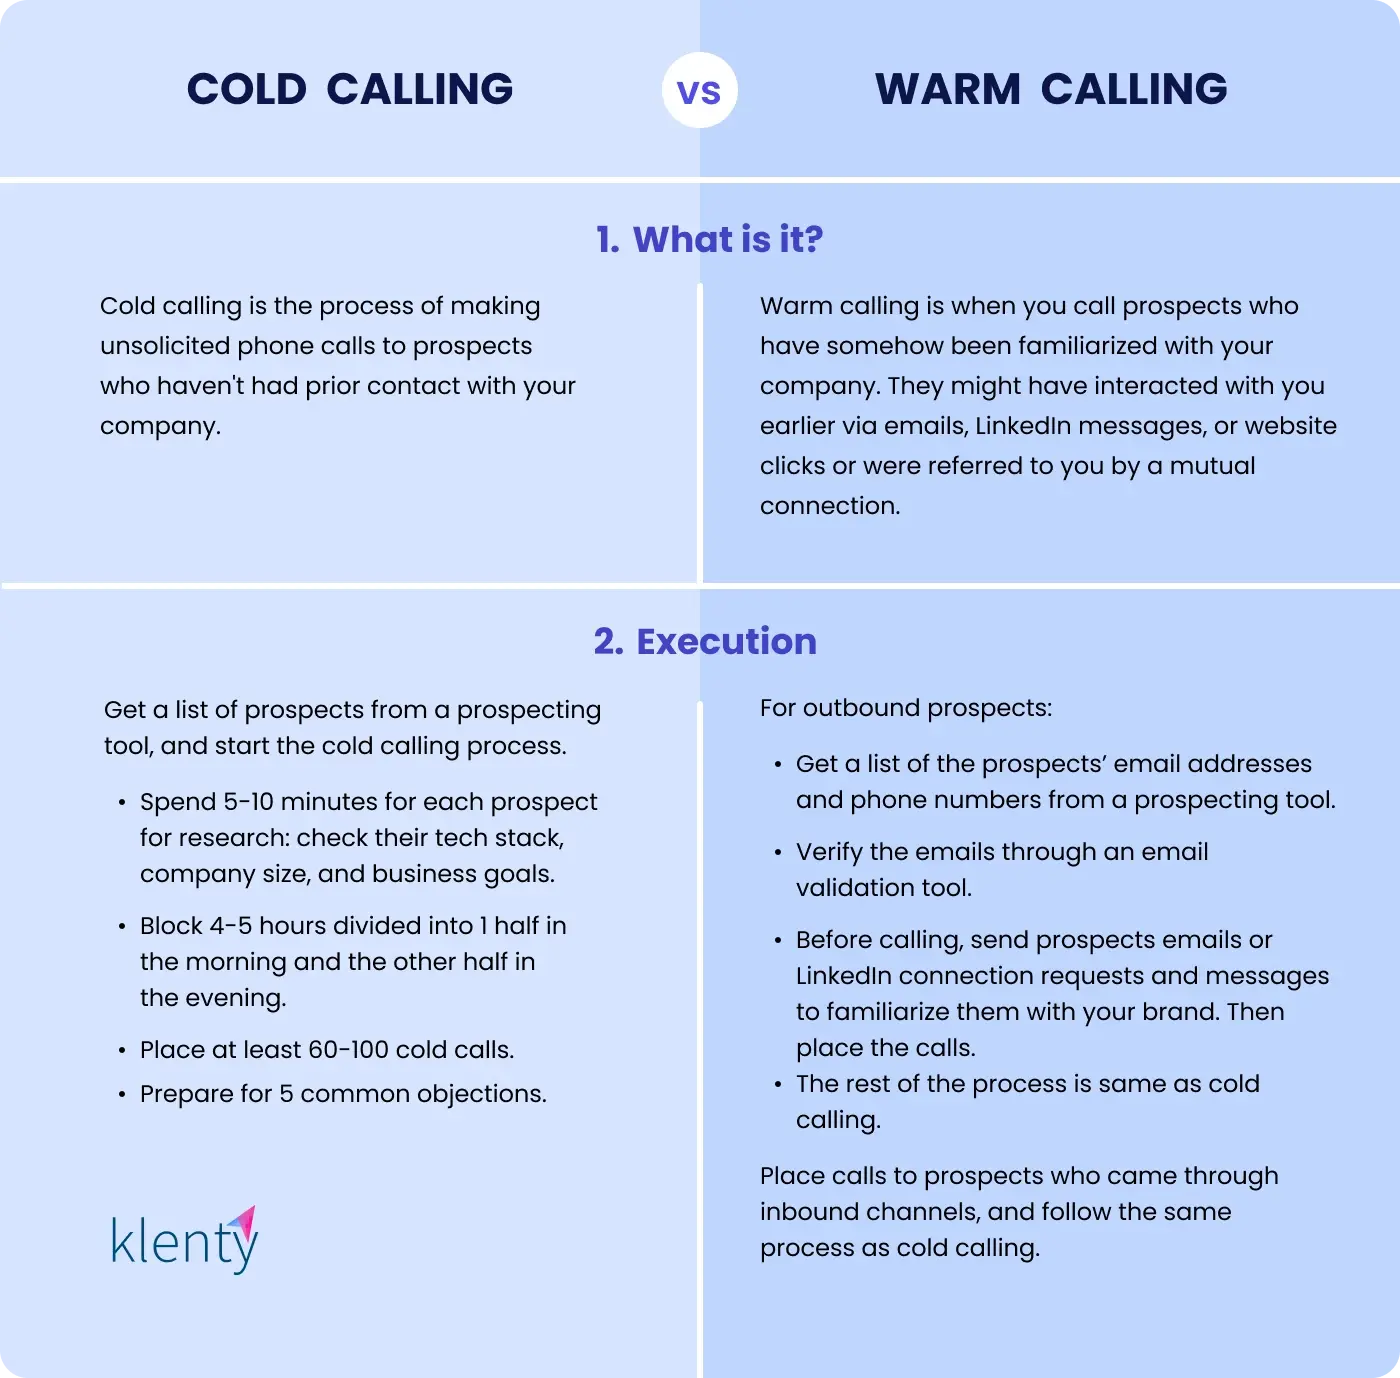 Difference between cold calling vs warm calling